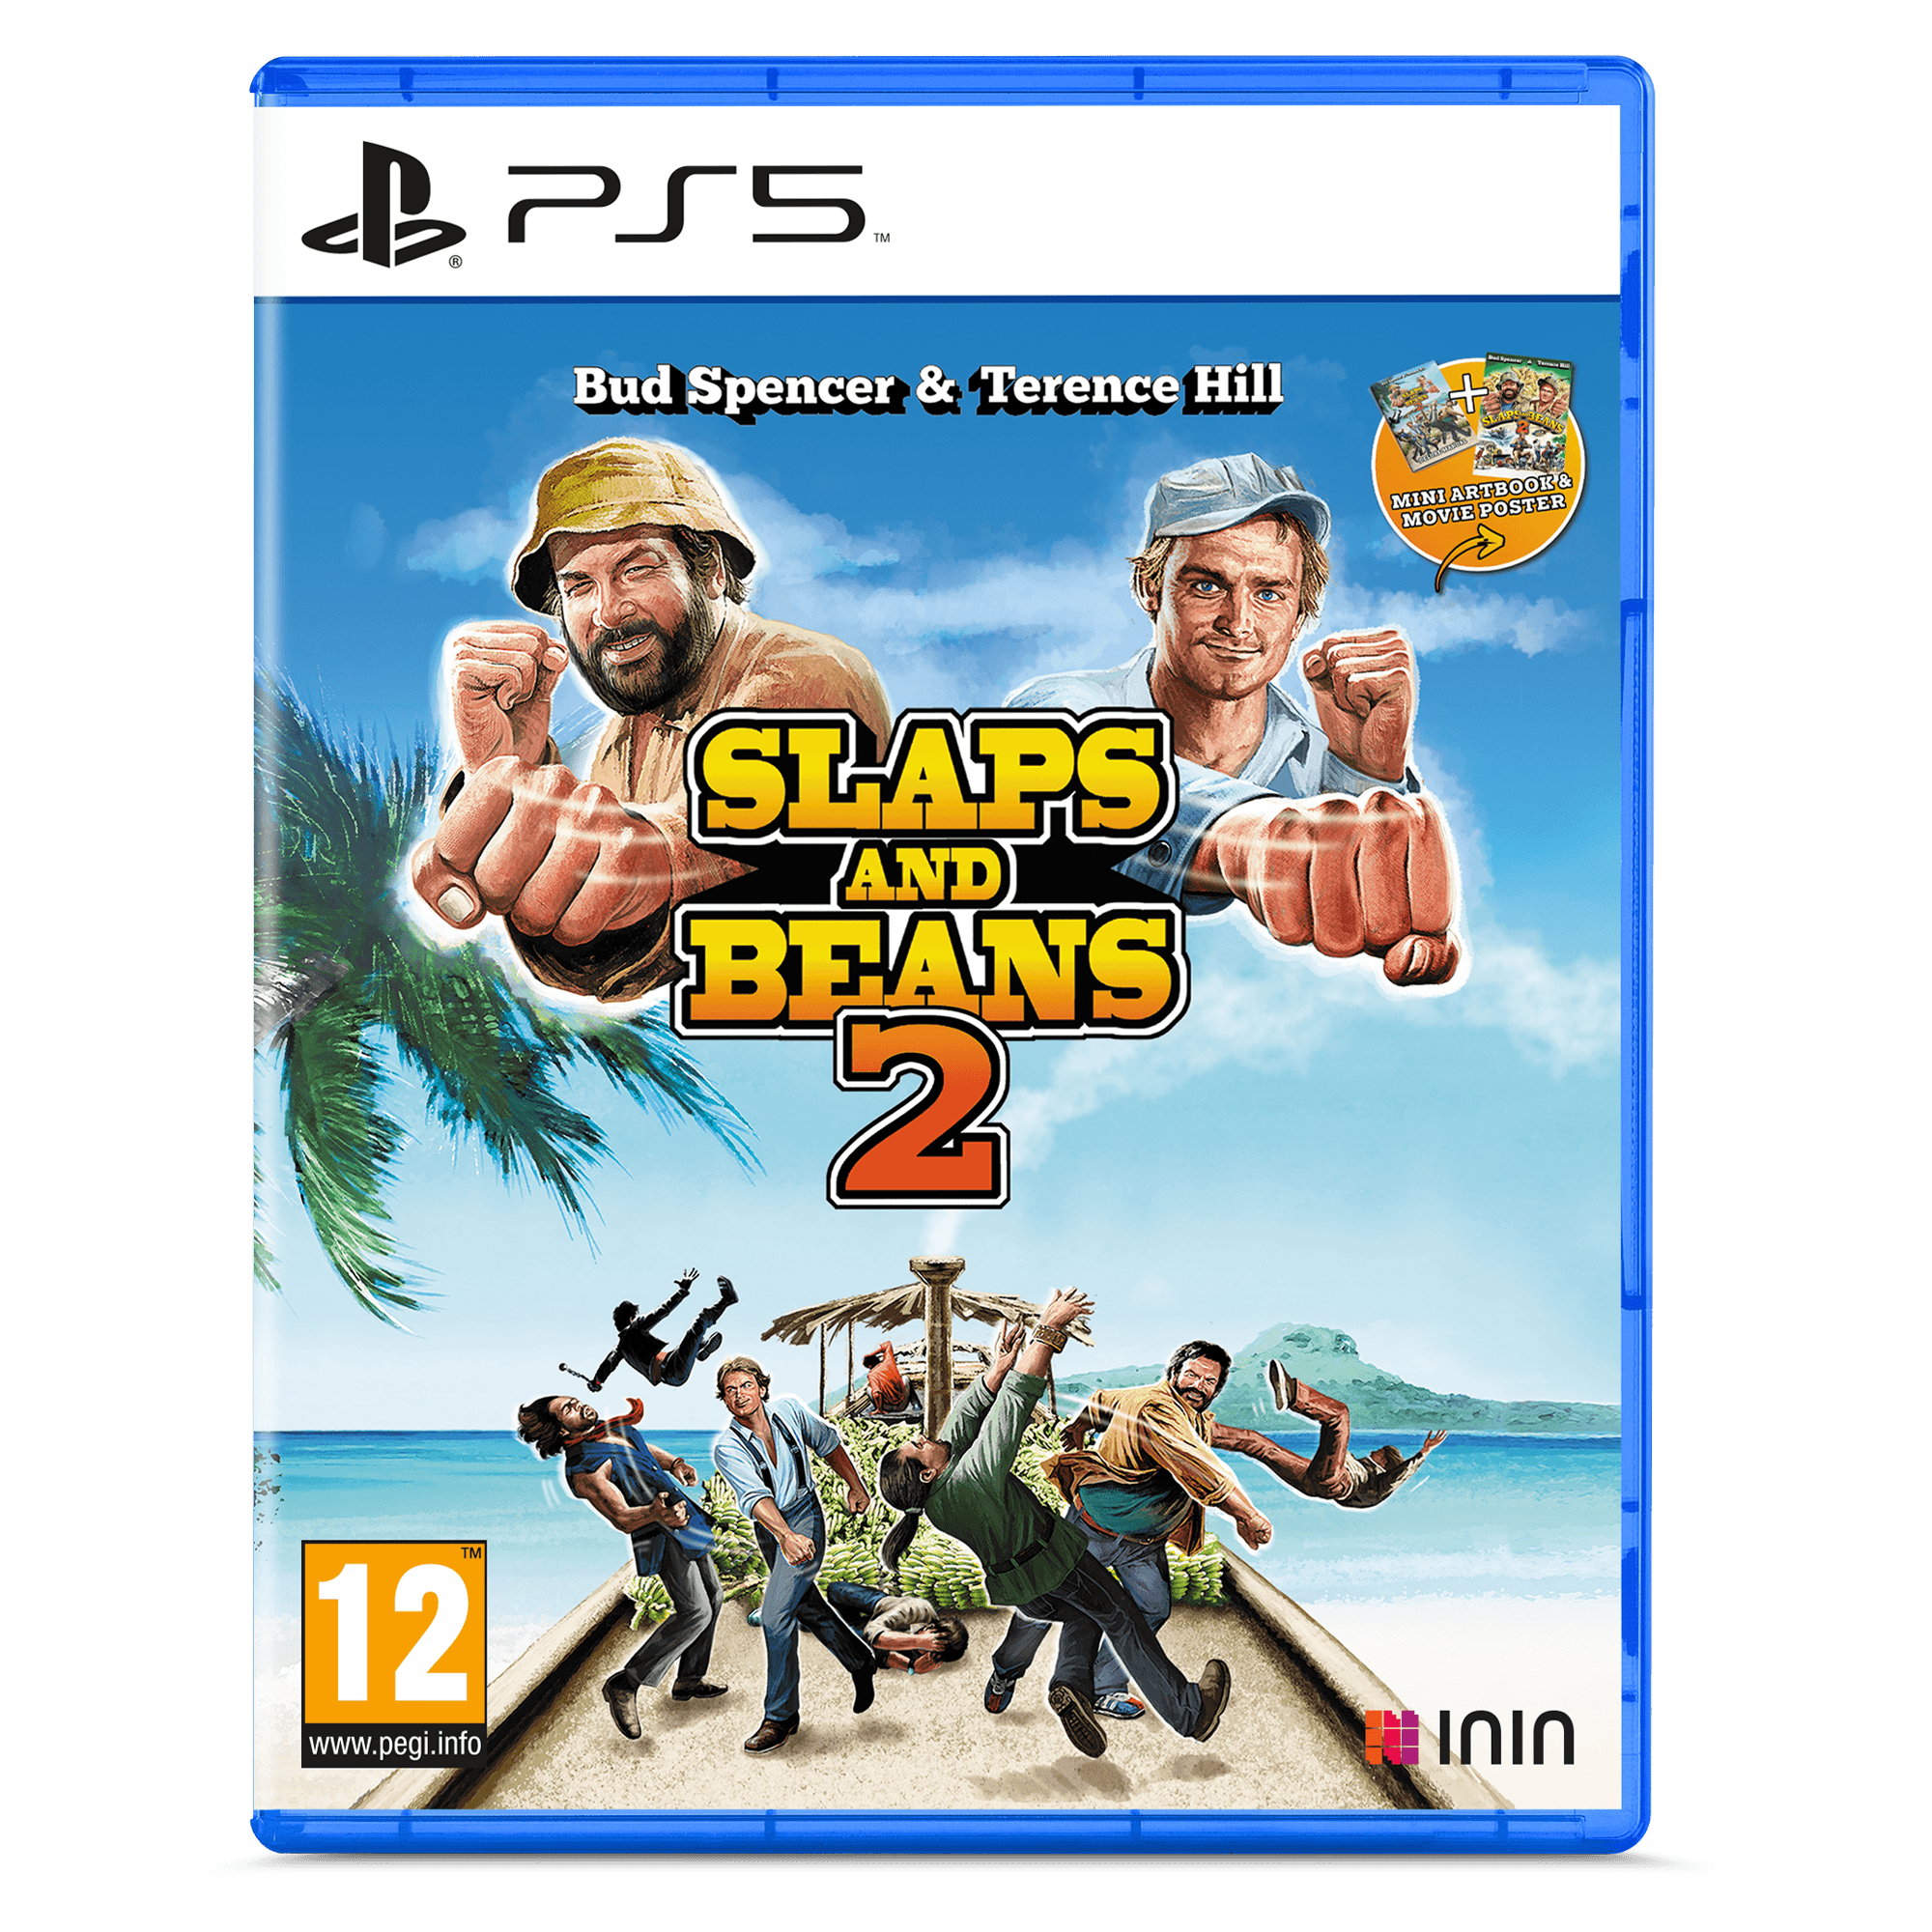 Bud Spencer & Terence Hill - Slaps and Beans 2Â - Want a New Gadget